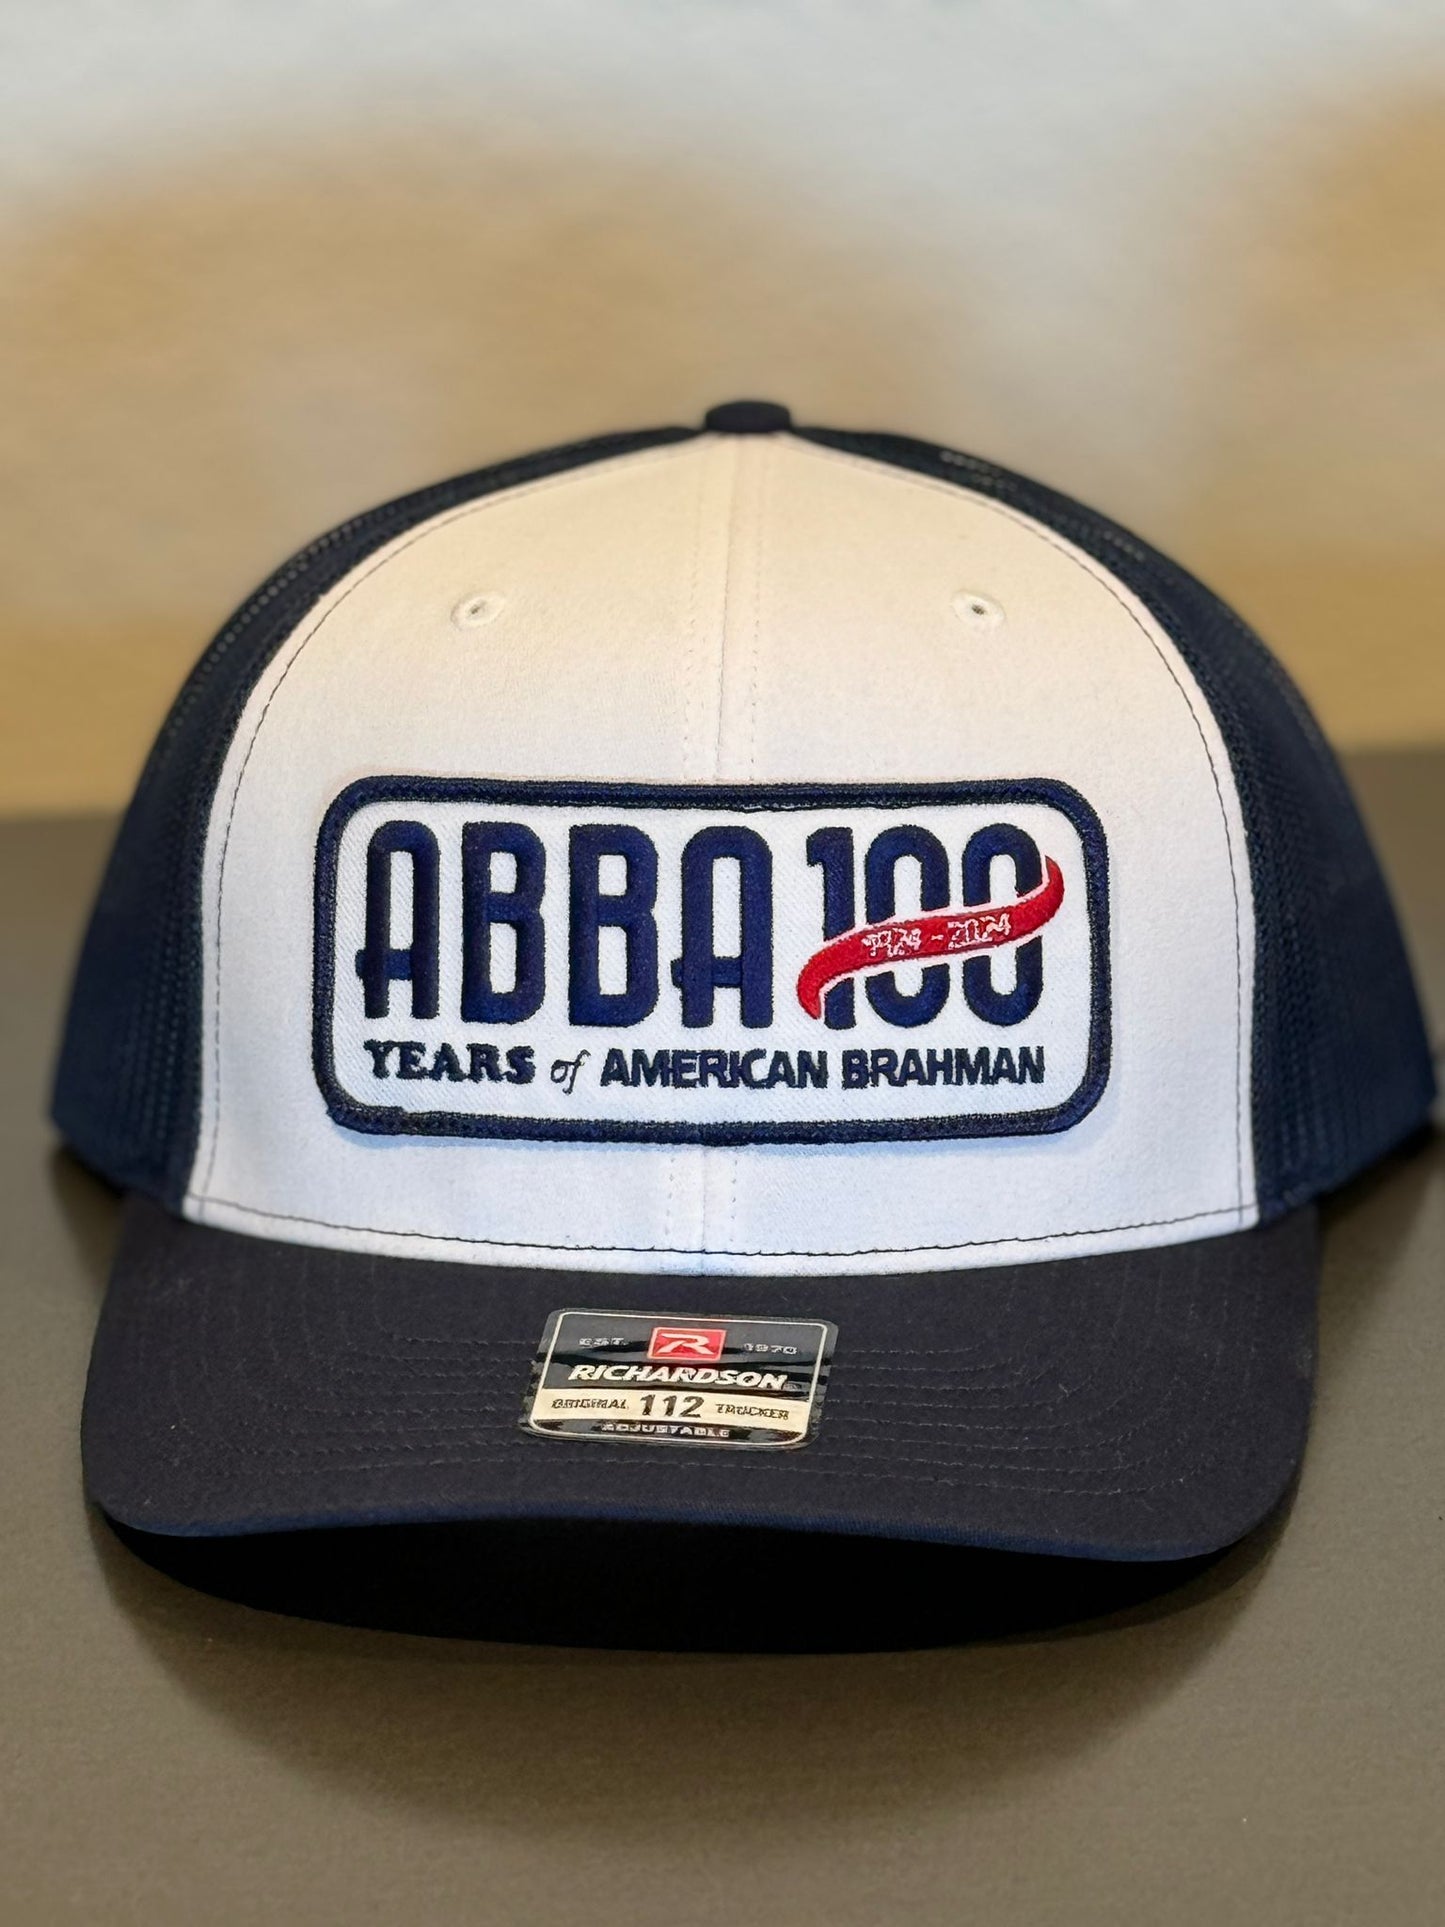 ABBA 100 Year Hat - White and Navy